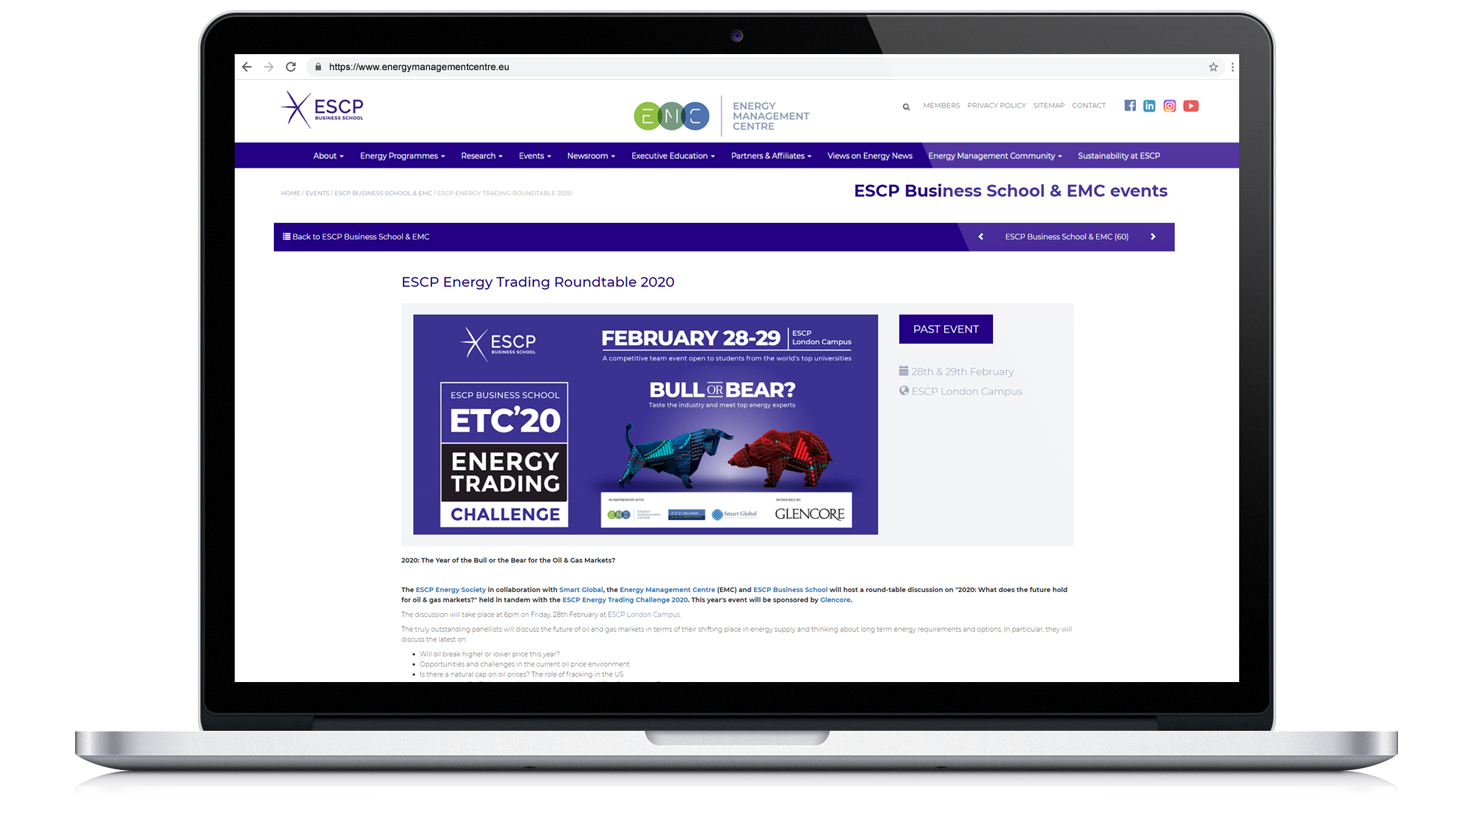 The EMC events pages CUSTOM WEBSITE | CMS